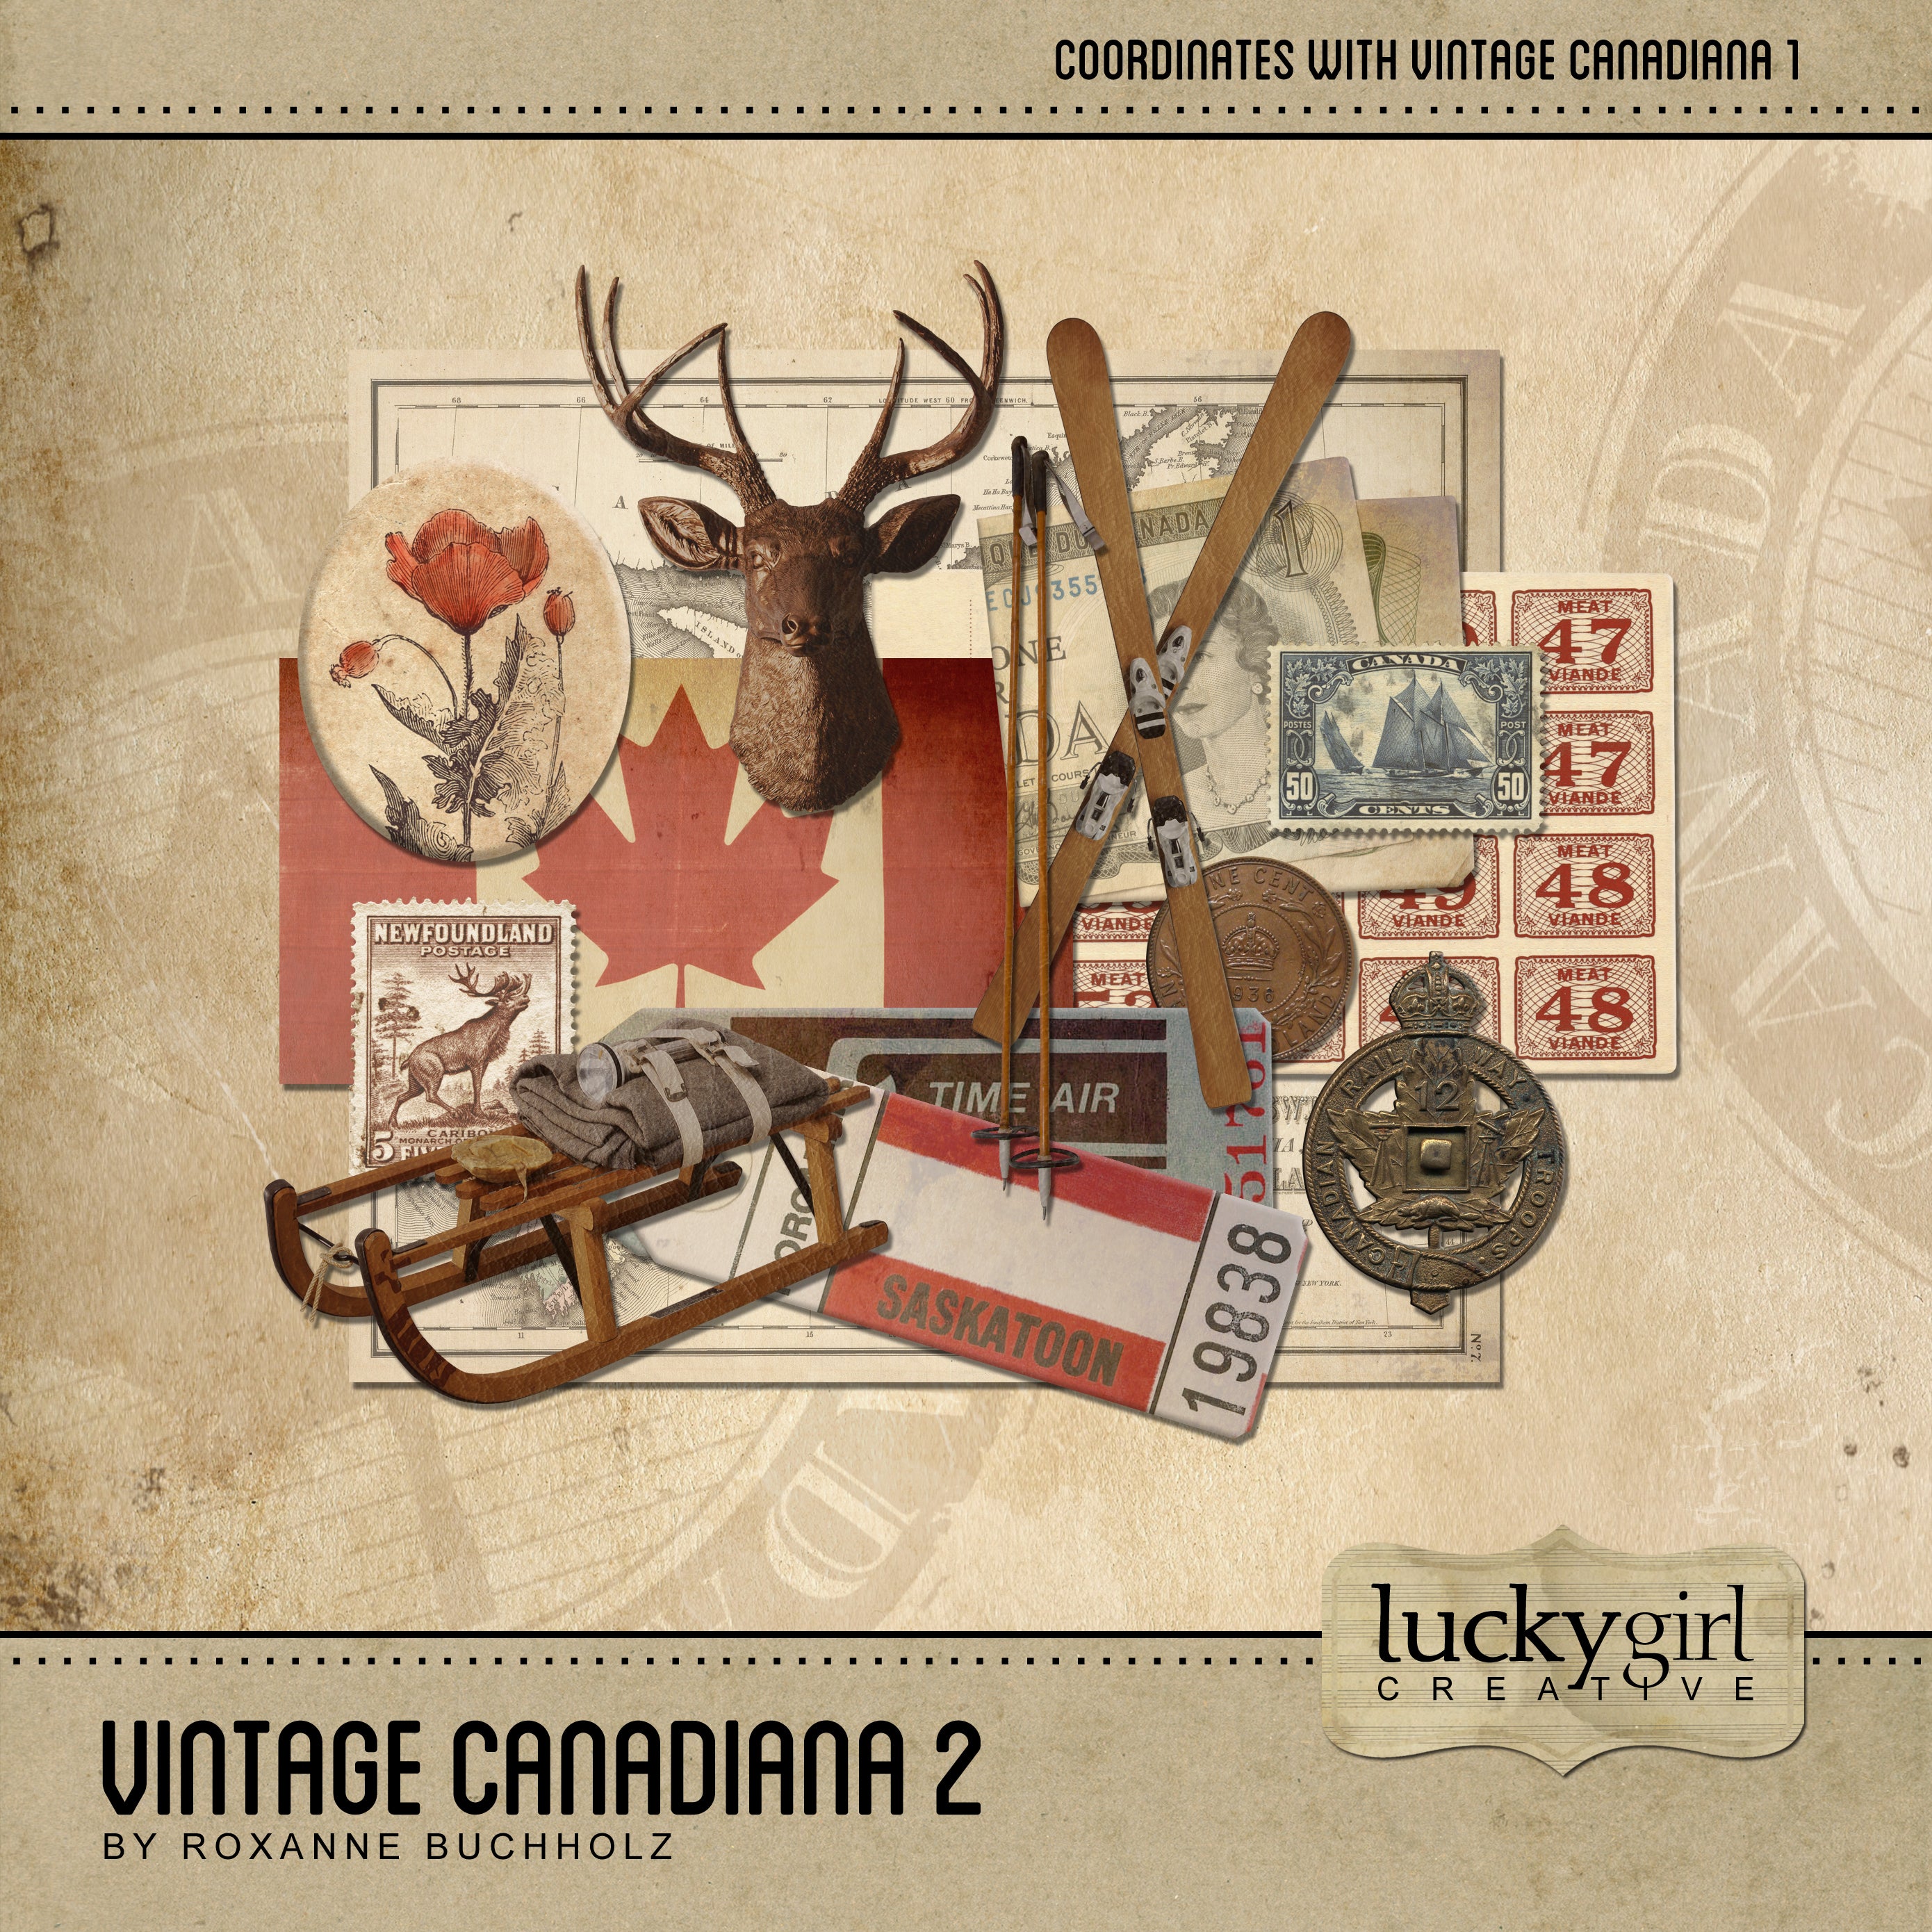 Canada Day digital scrapbook kits by Lucky Girl Creative offer a wide variety of realistic embellishments and digital paper. Document your Canadian family heritage or celebrating Canada Day.